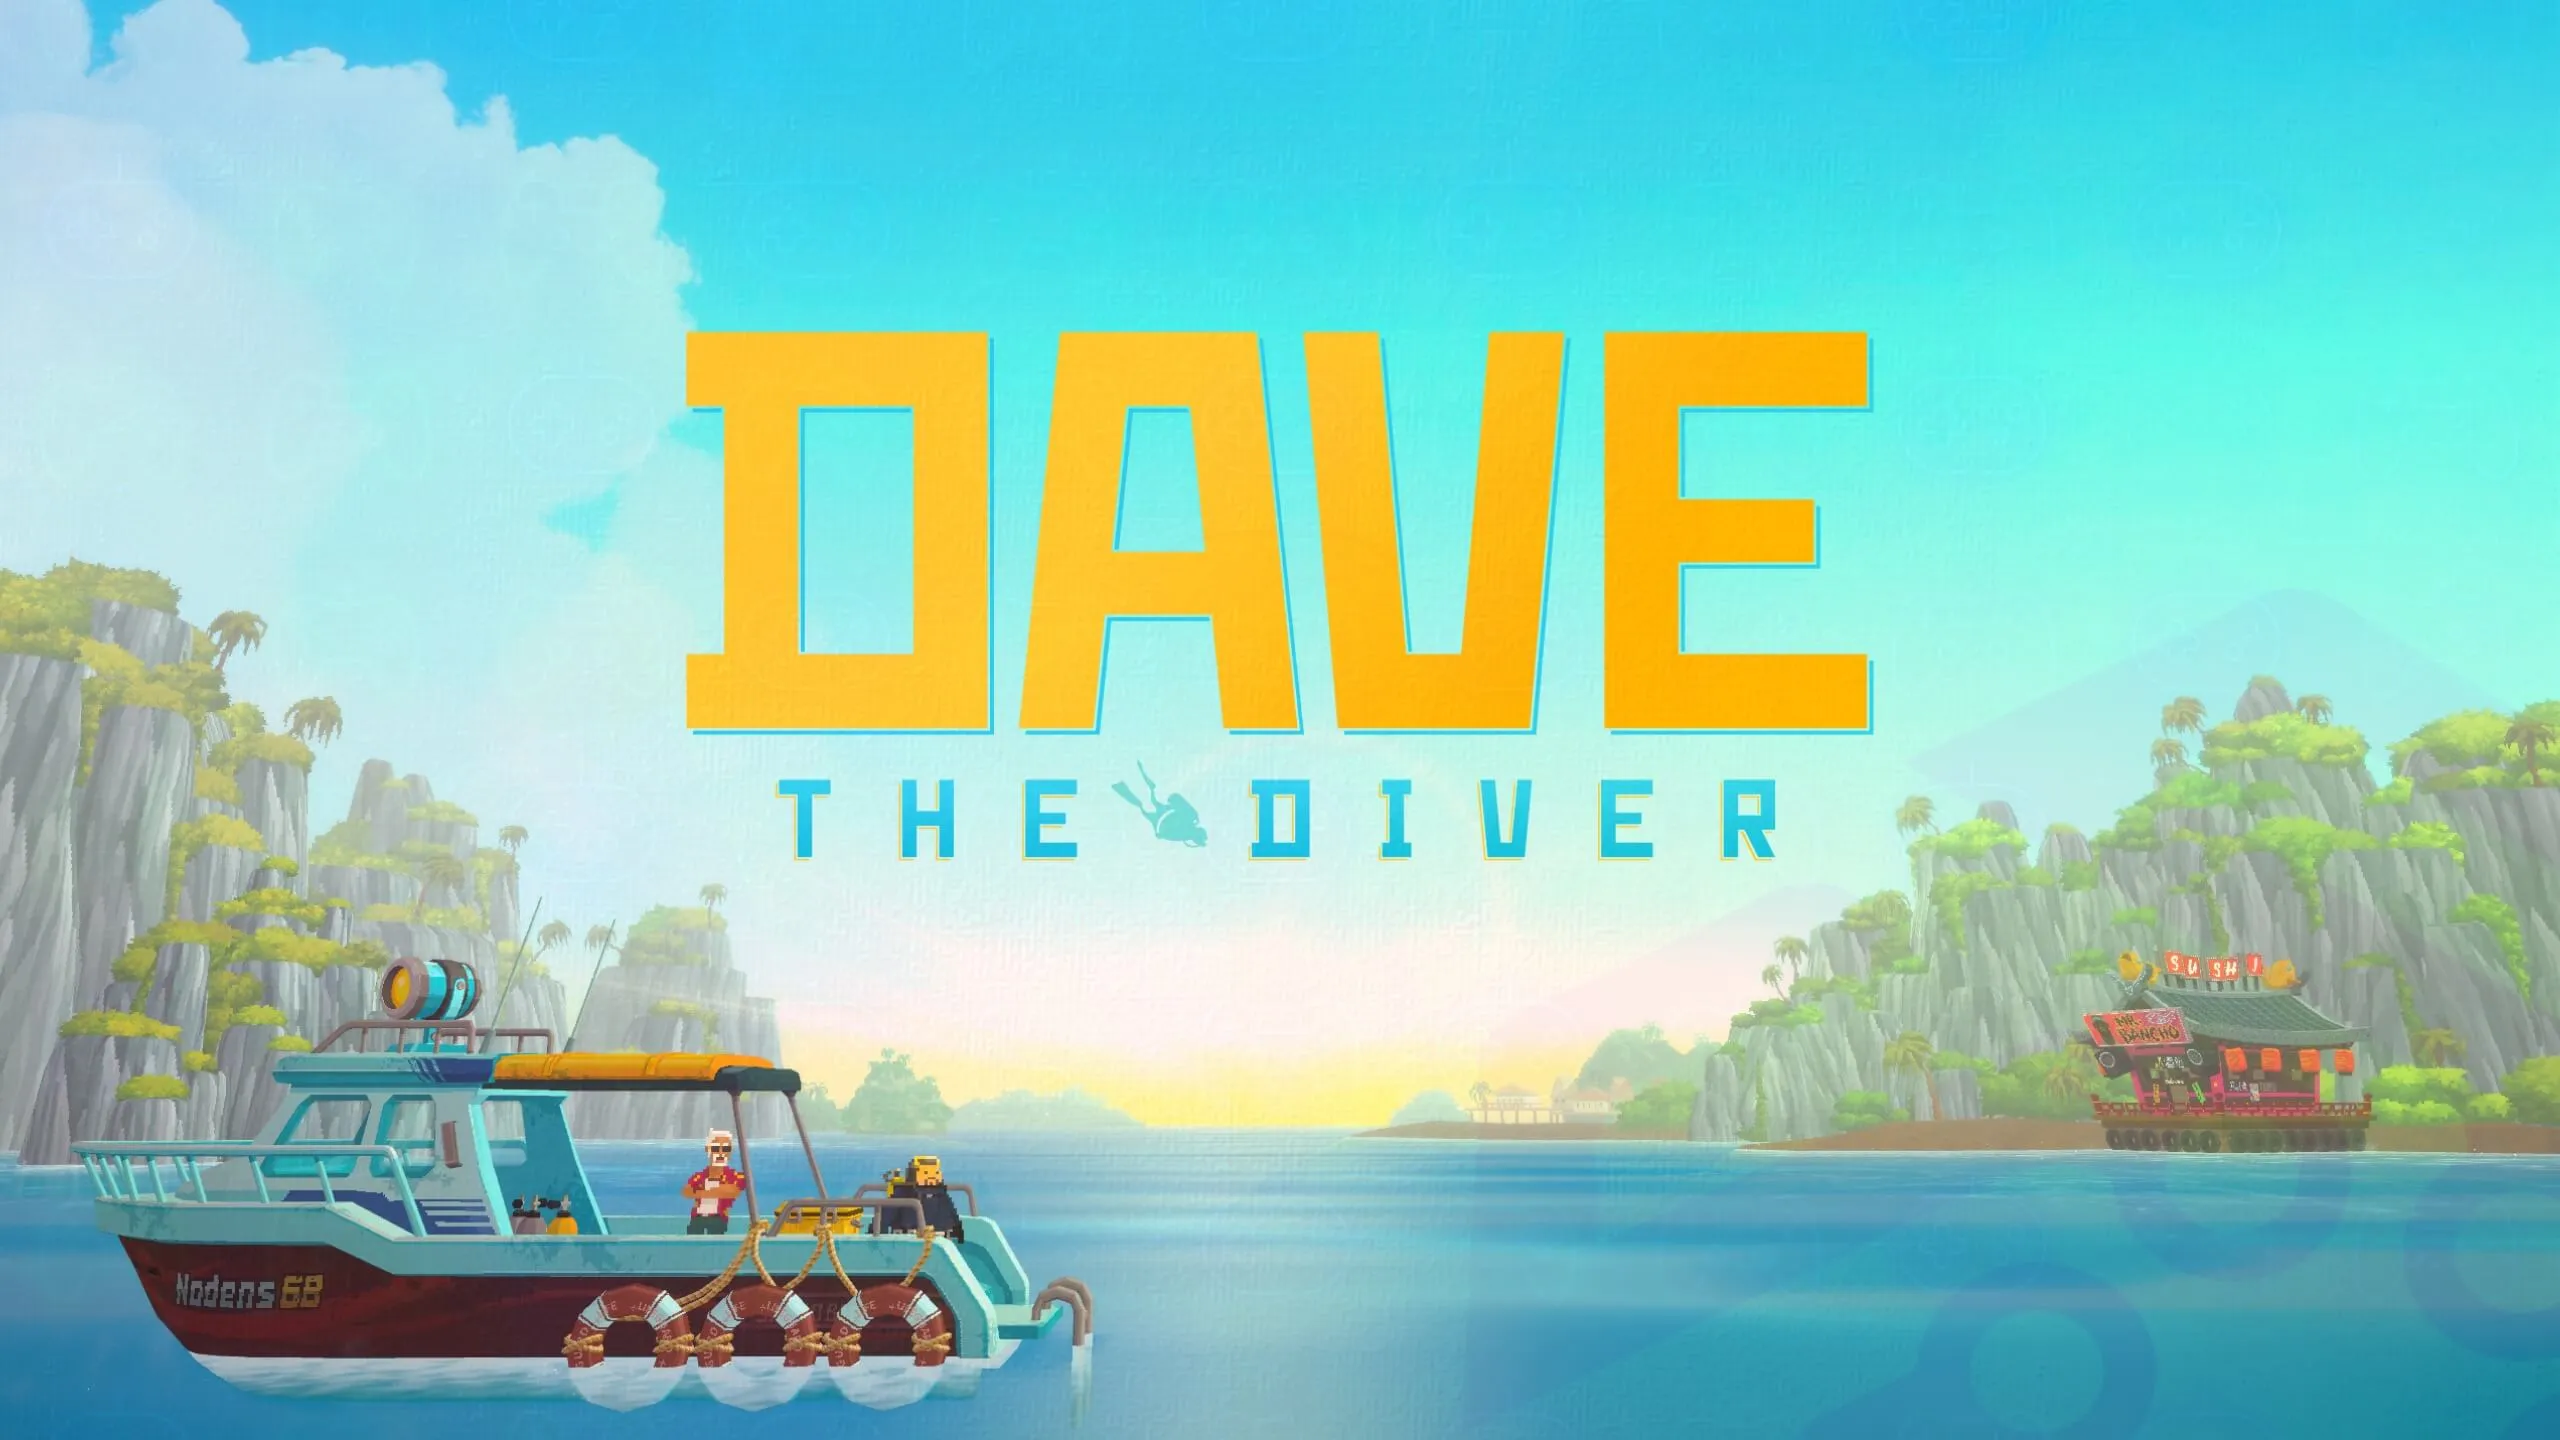 Dave the diver boat in the river